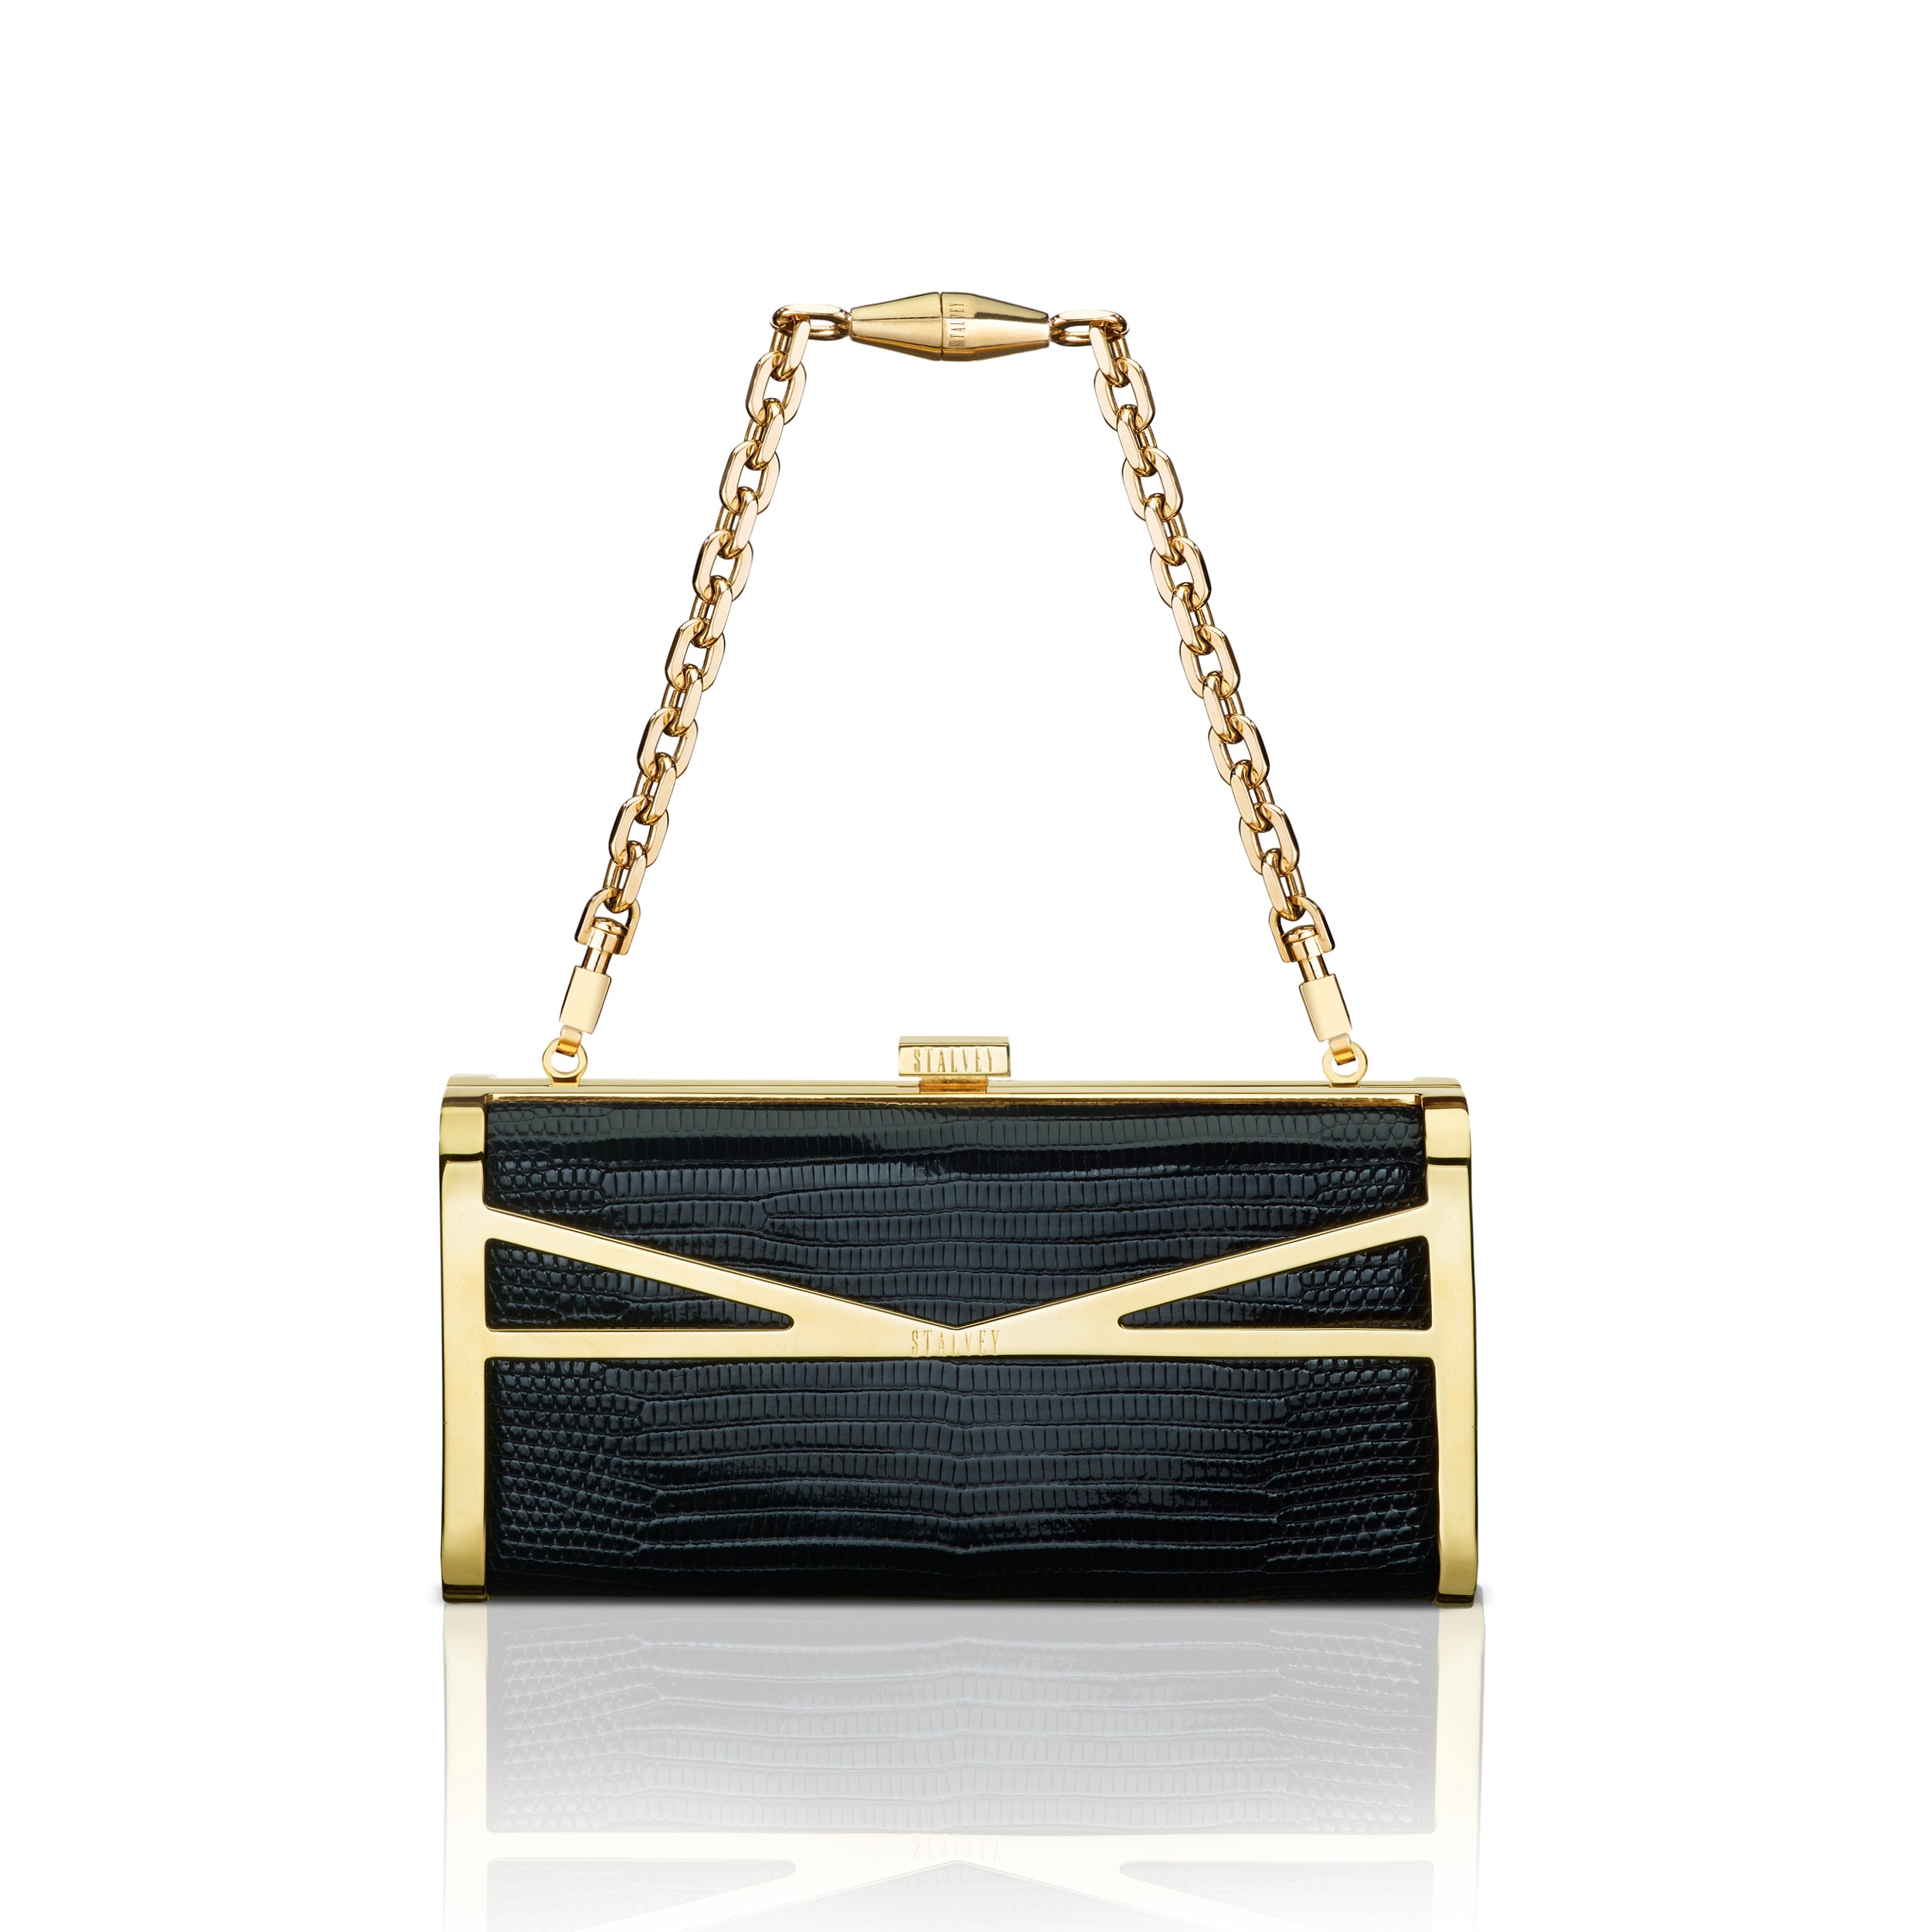 STALVEY Square Clutch in Black Lizard with 24kt Gold Hardware Front View with Chain